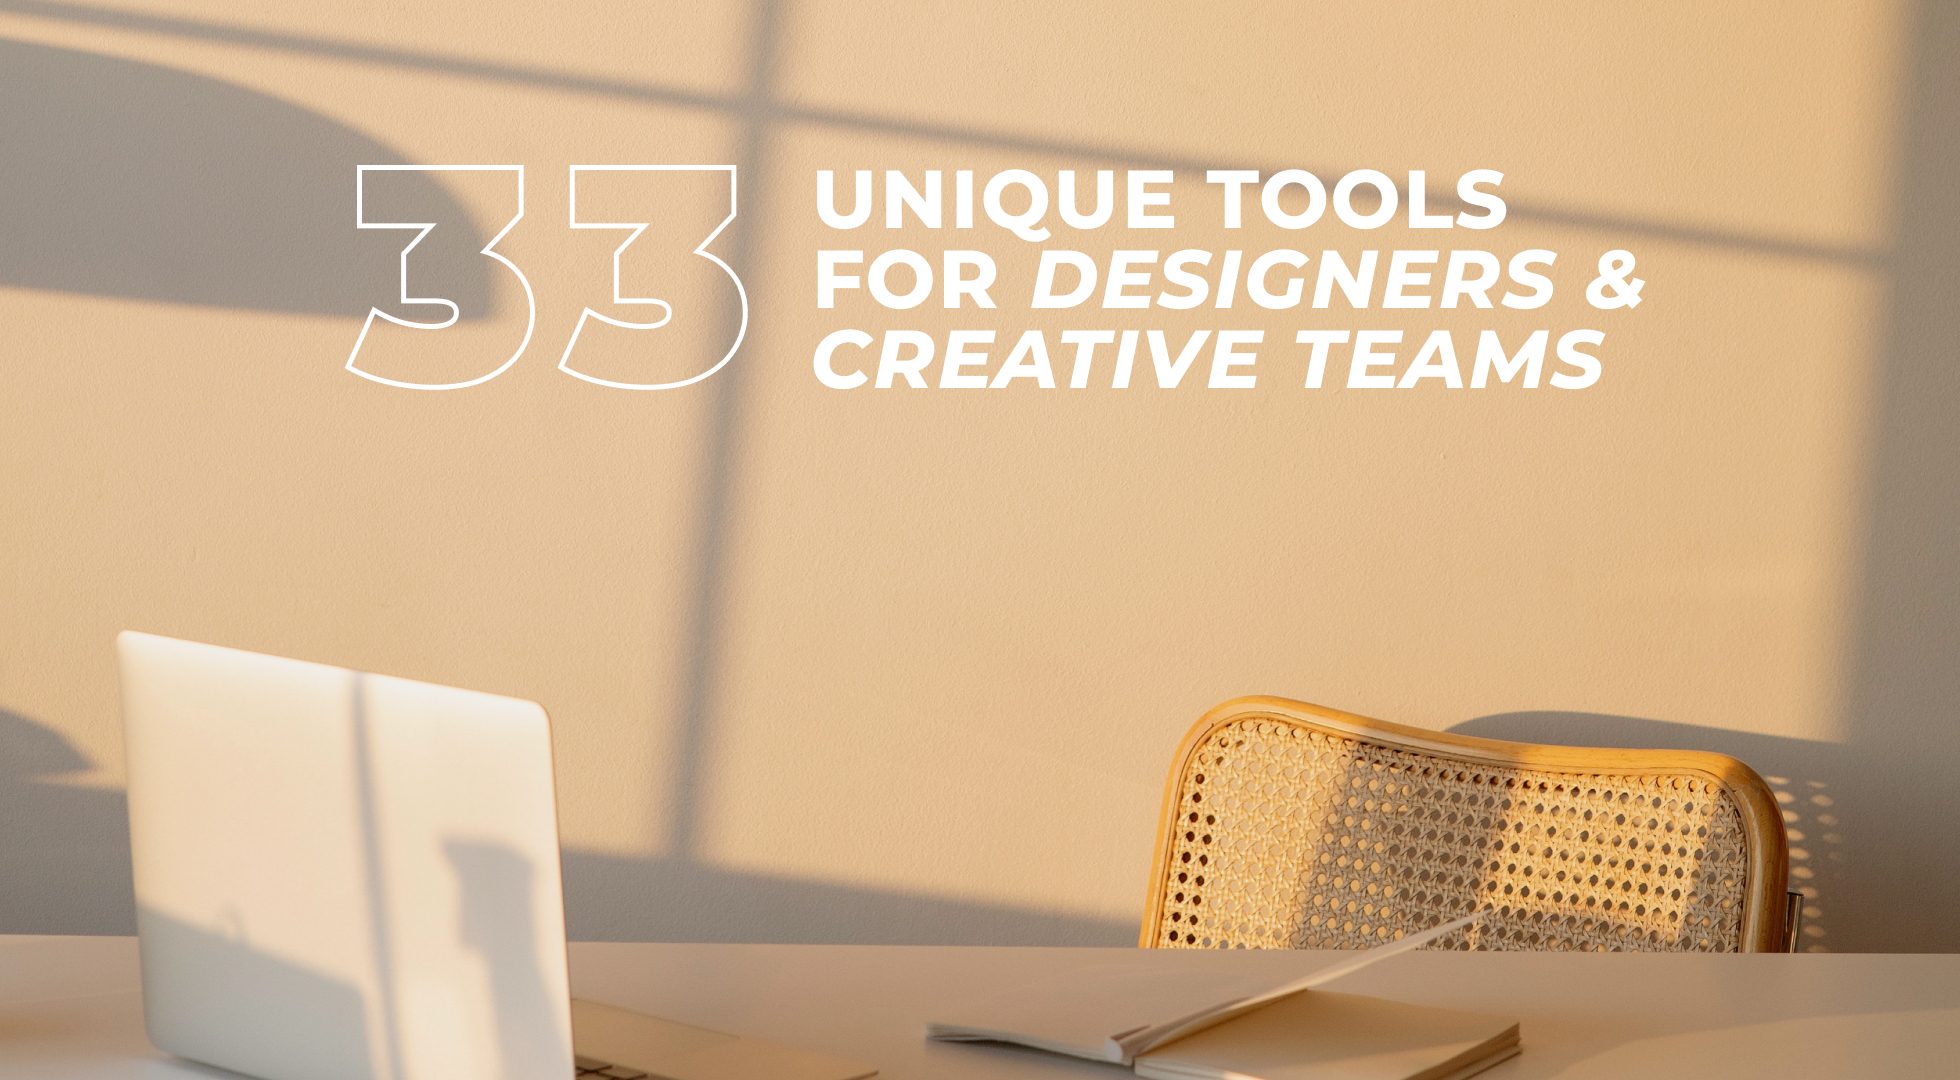 Top-33 unique tools for designers and creative teams